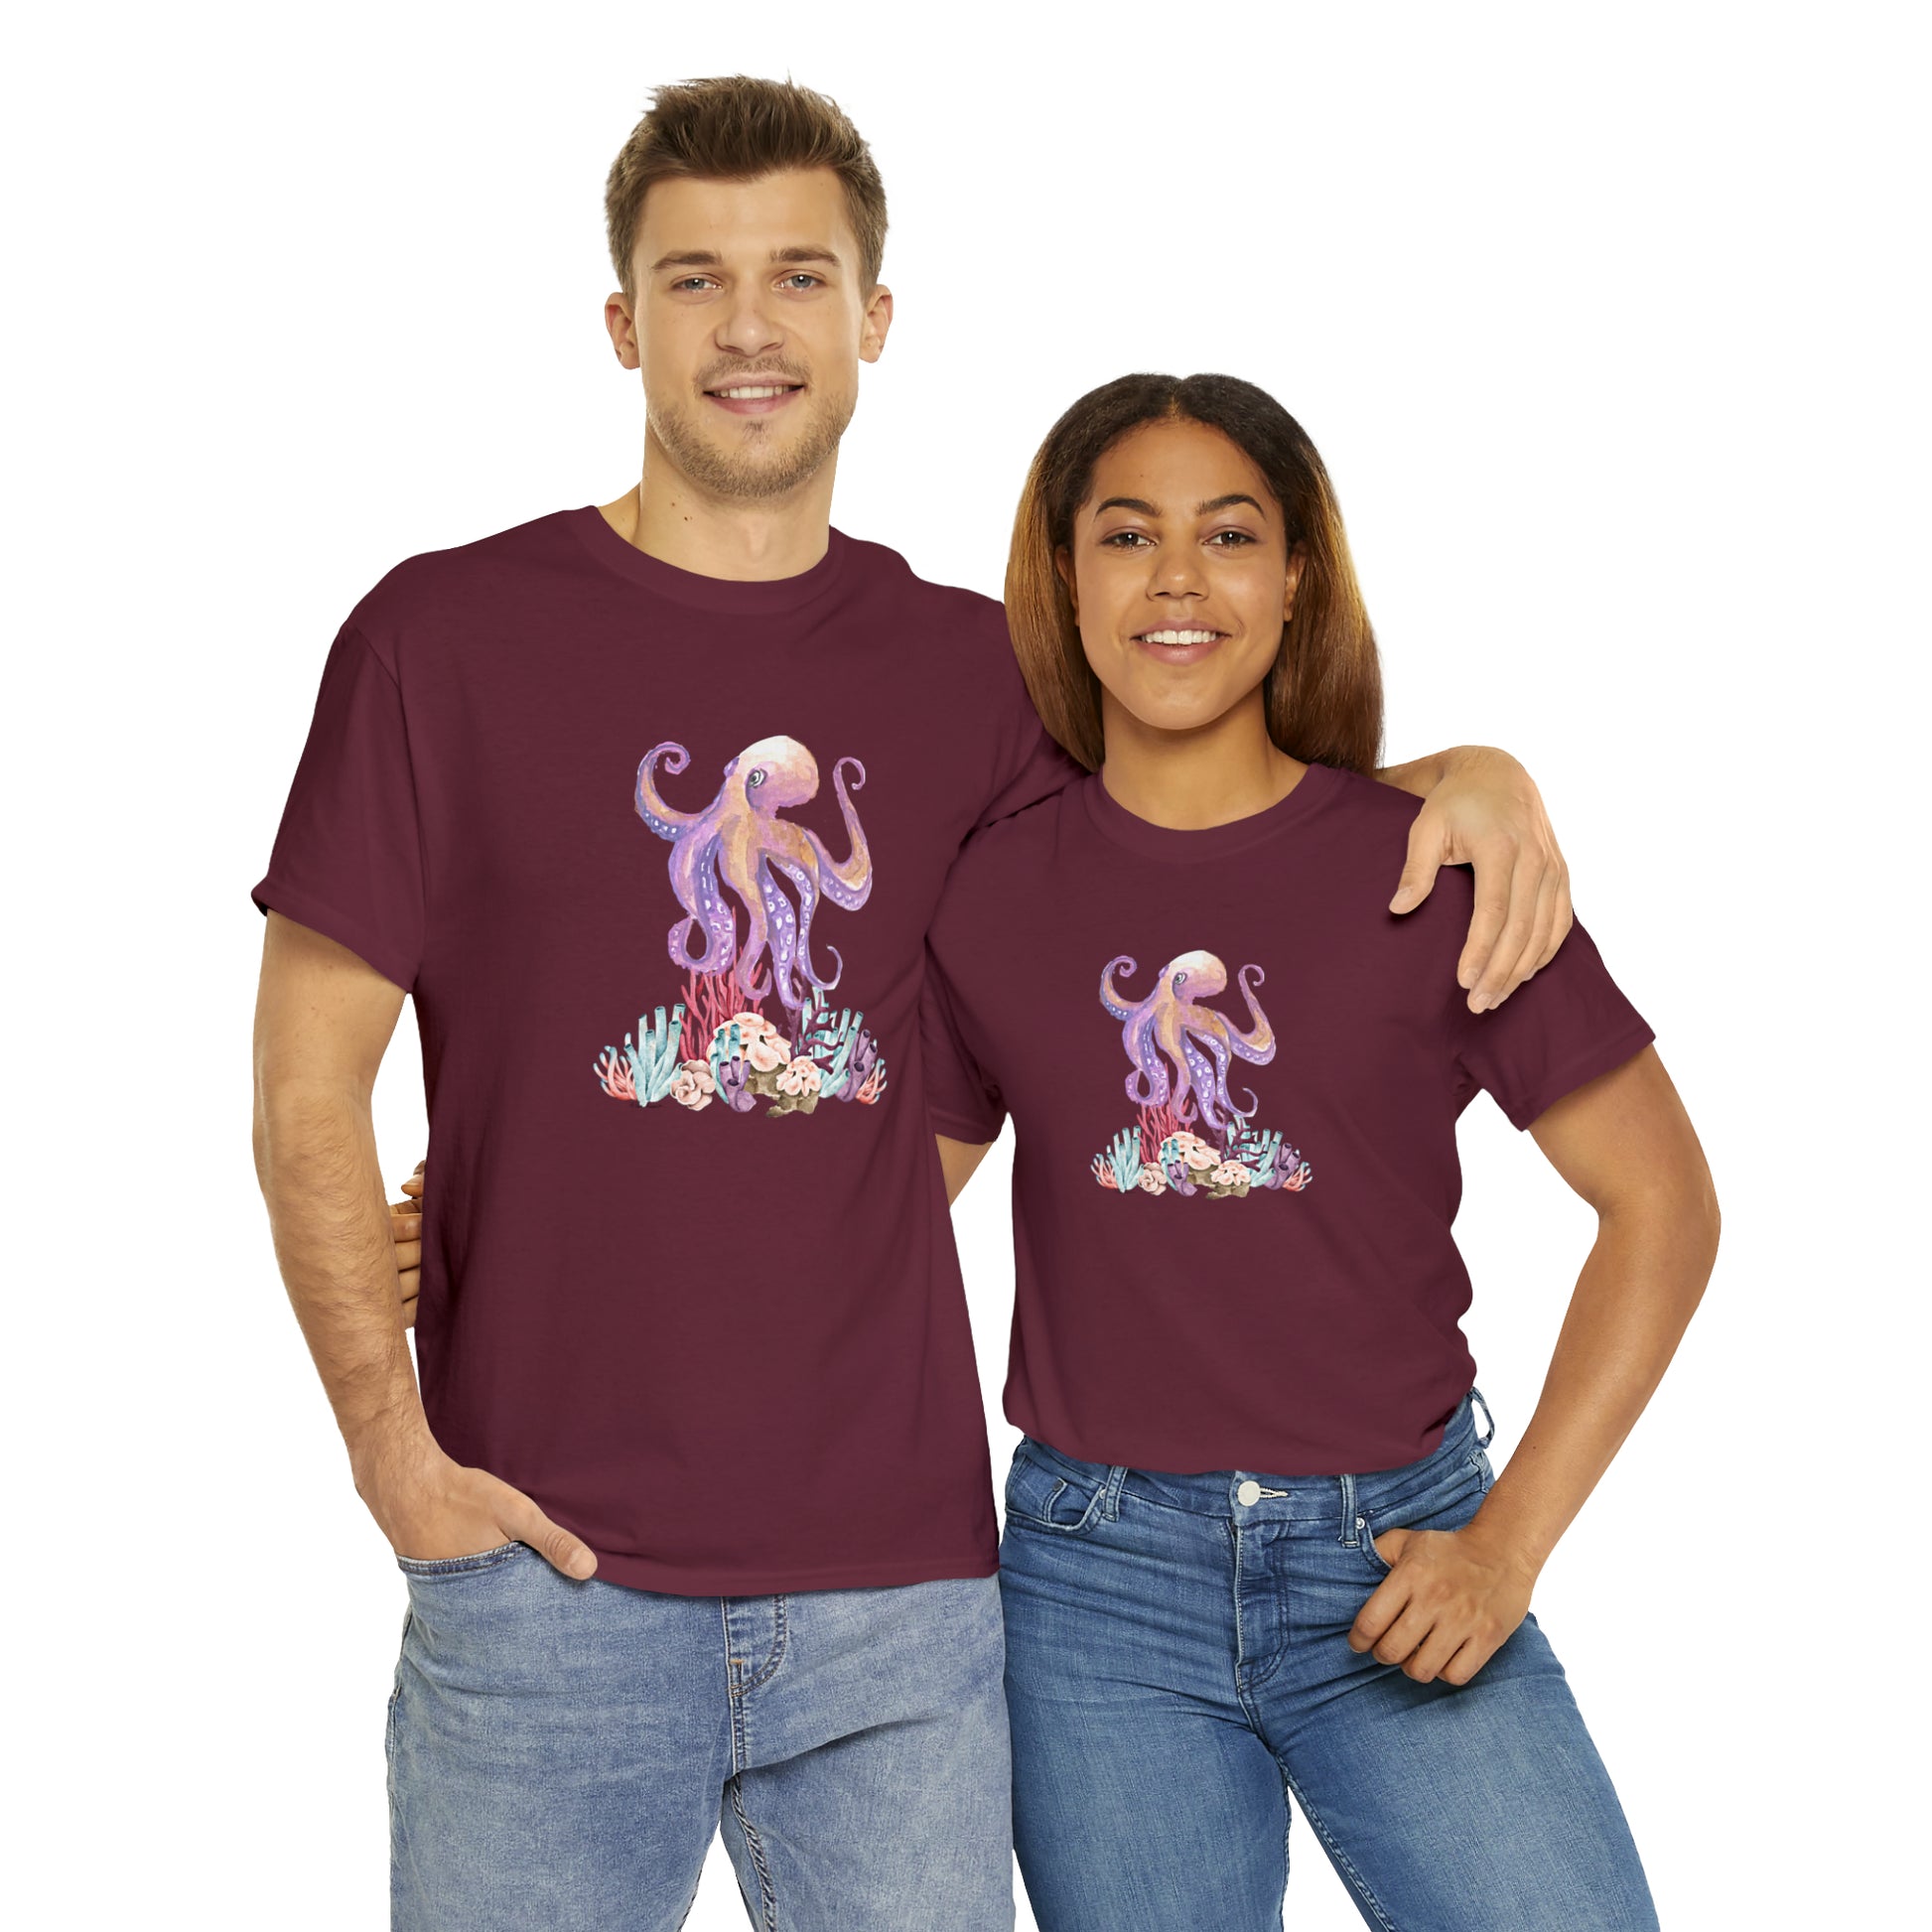 Mock up of a man and a woman wearing the Maroon shirt 